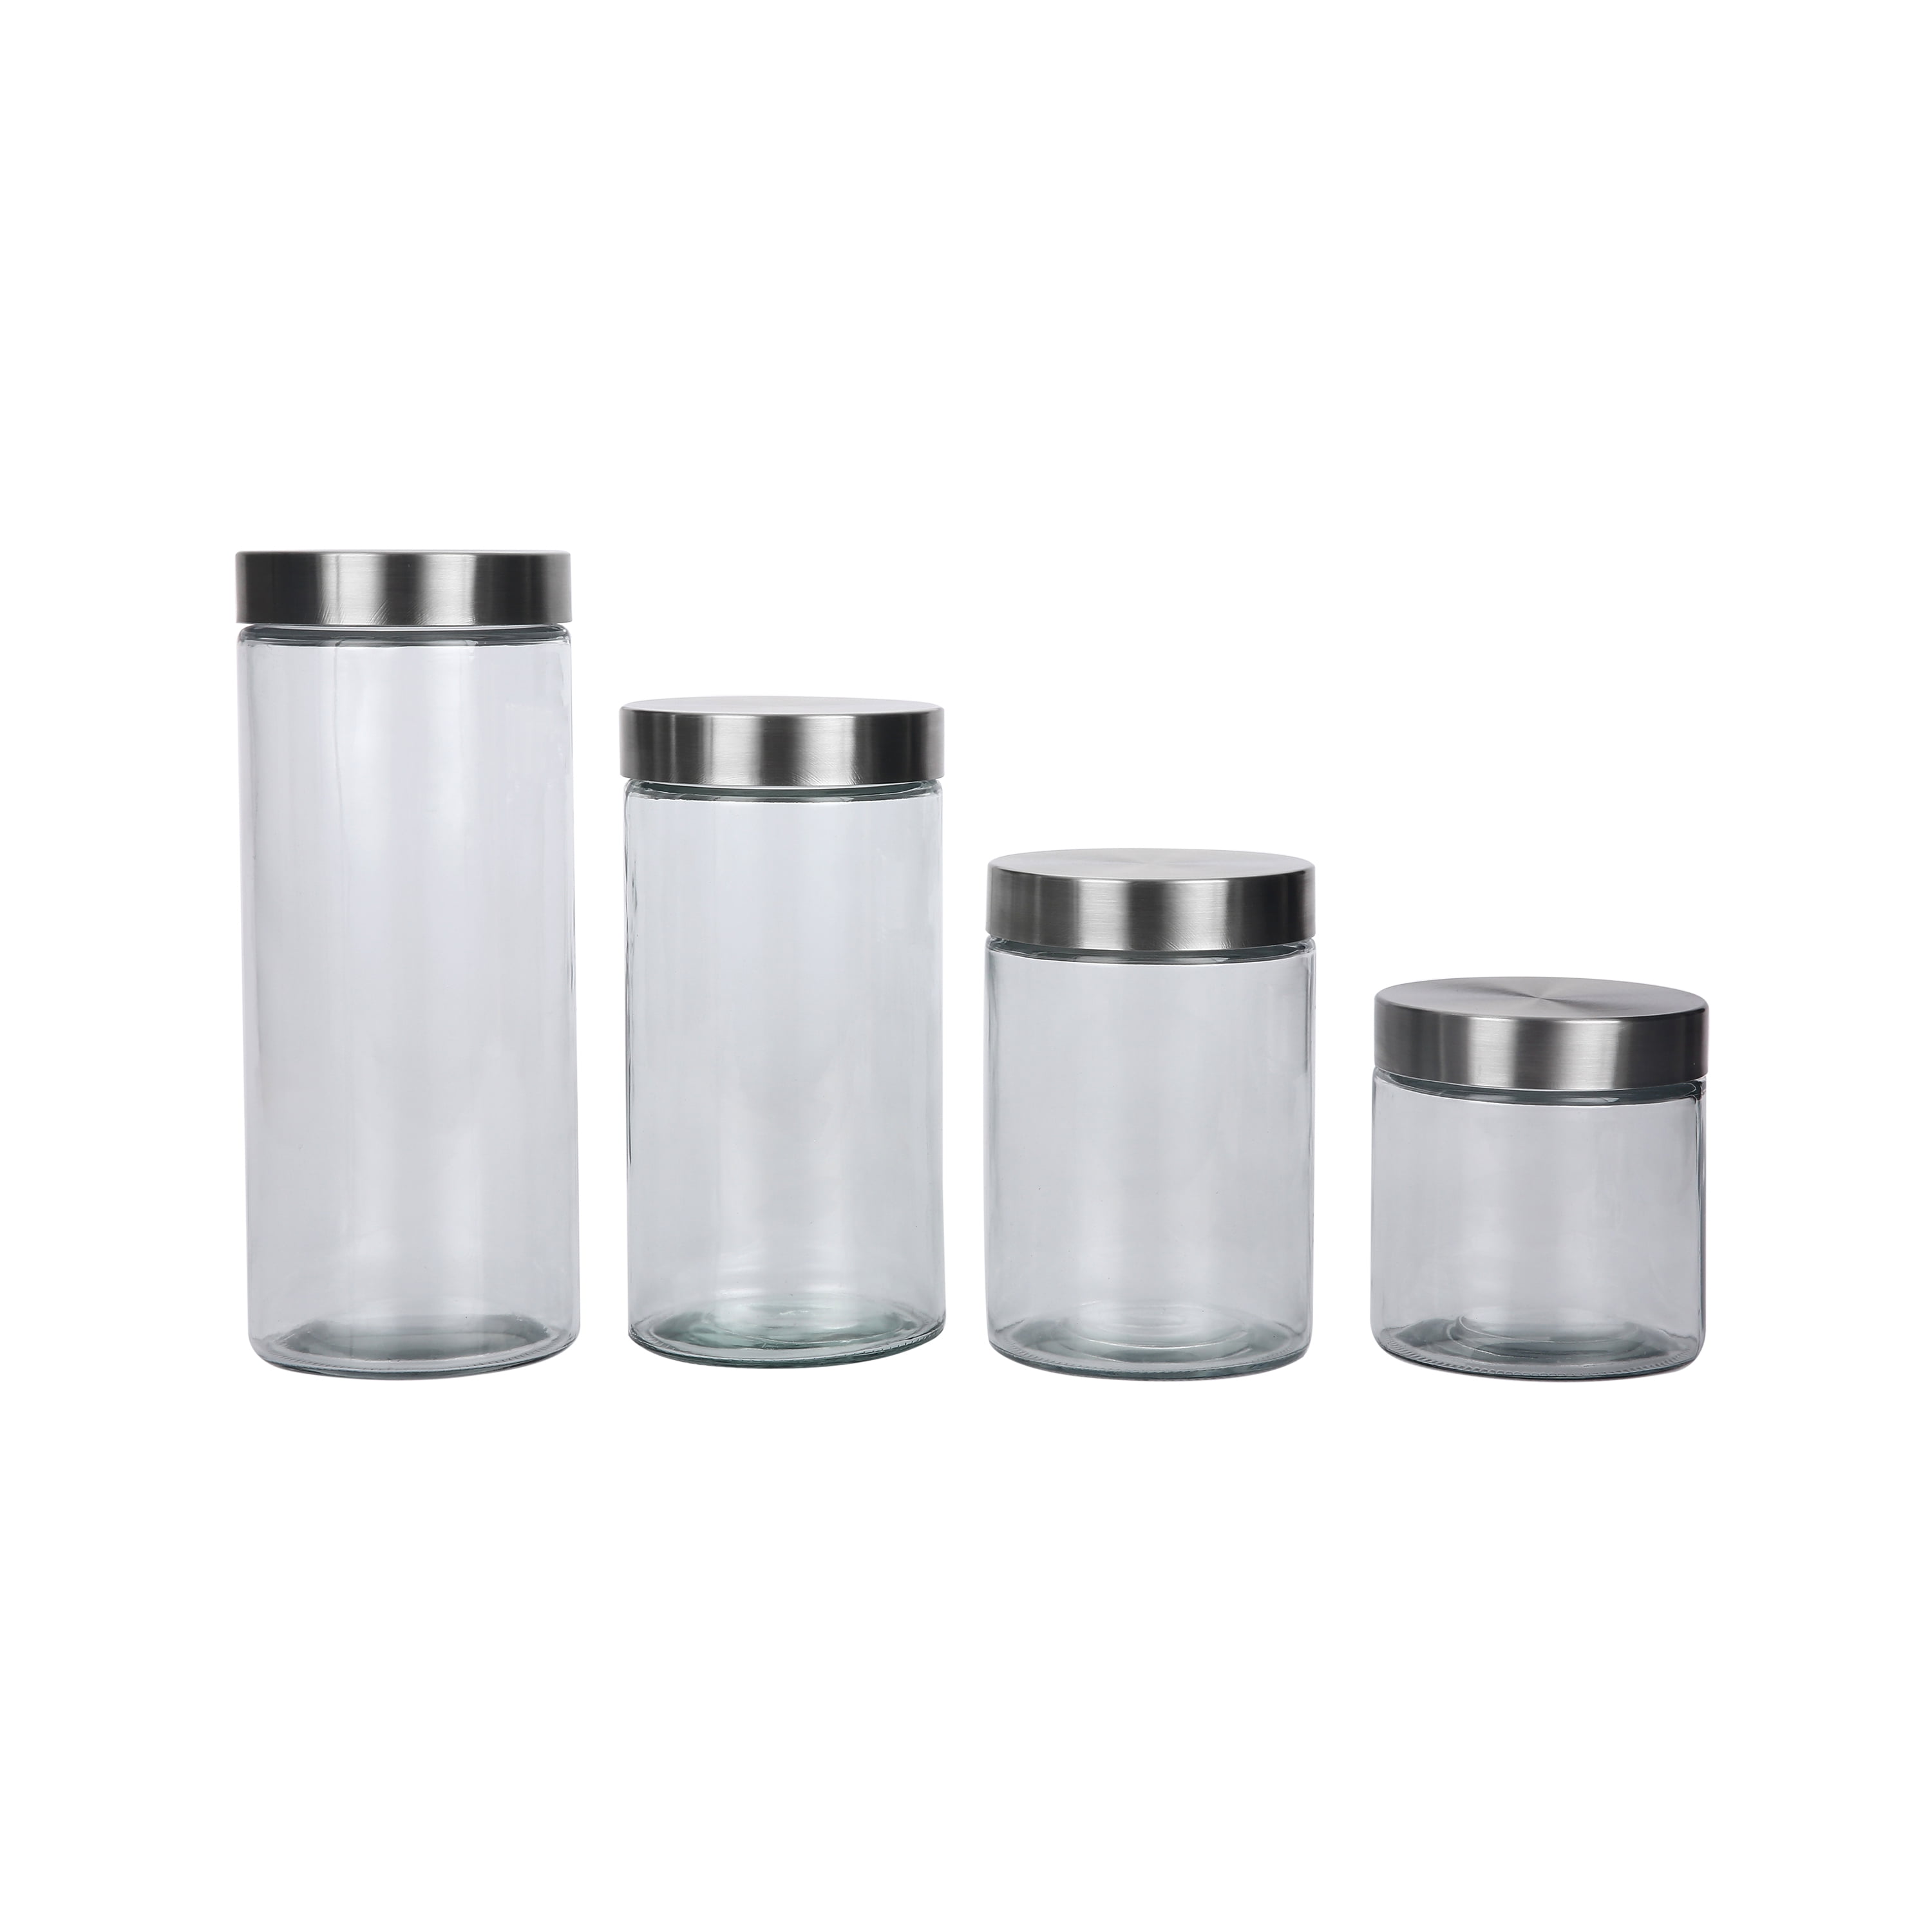 Mainstays Glass Storage Canisters with Stainless Steel Lids, 4 Piece Set